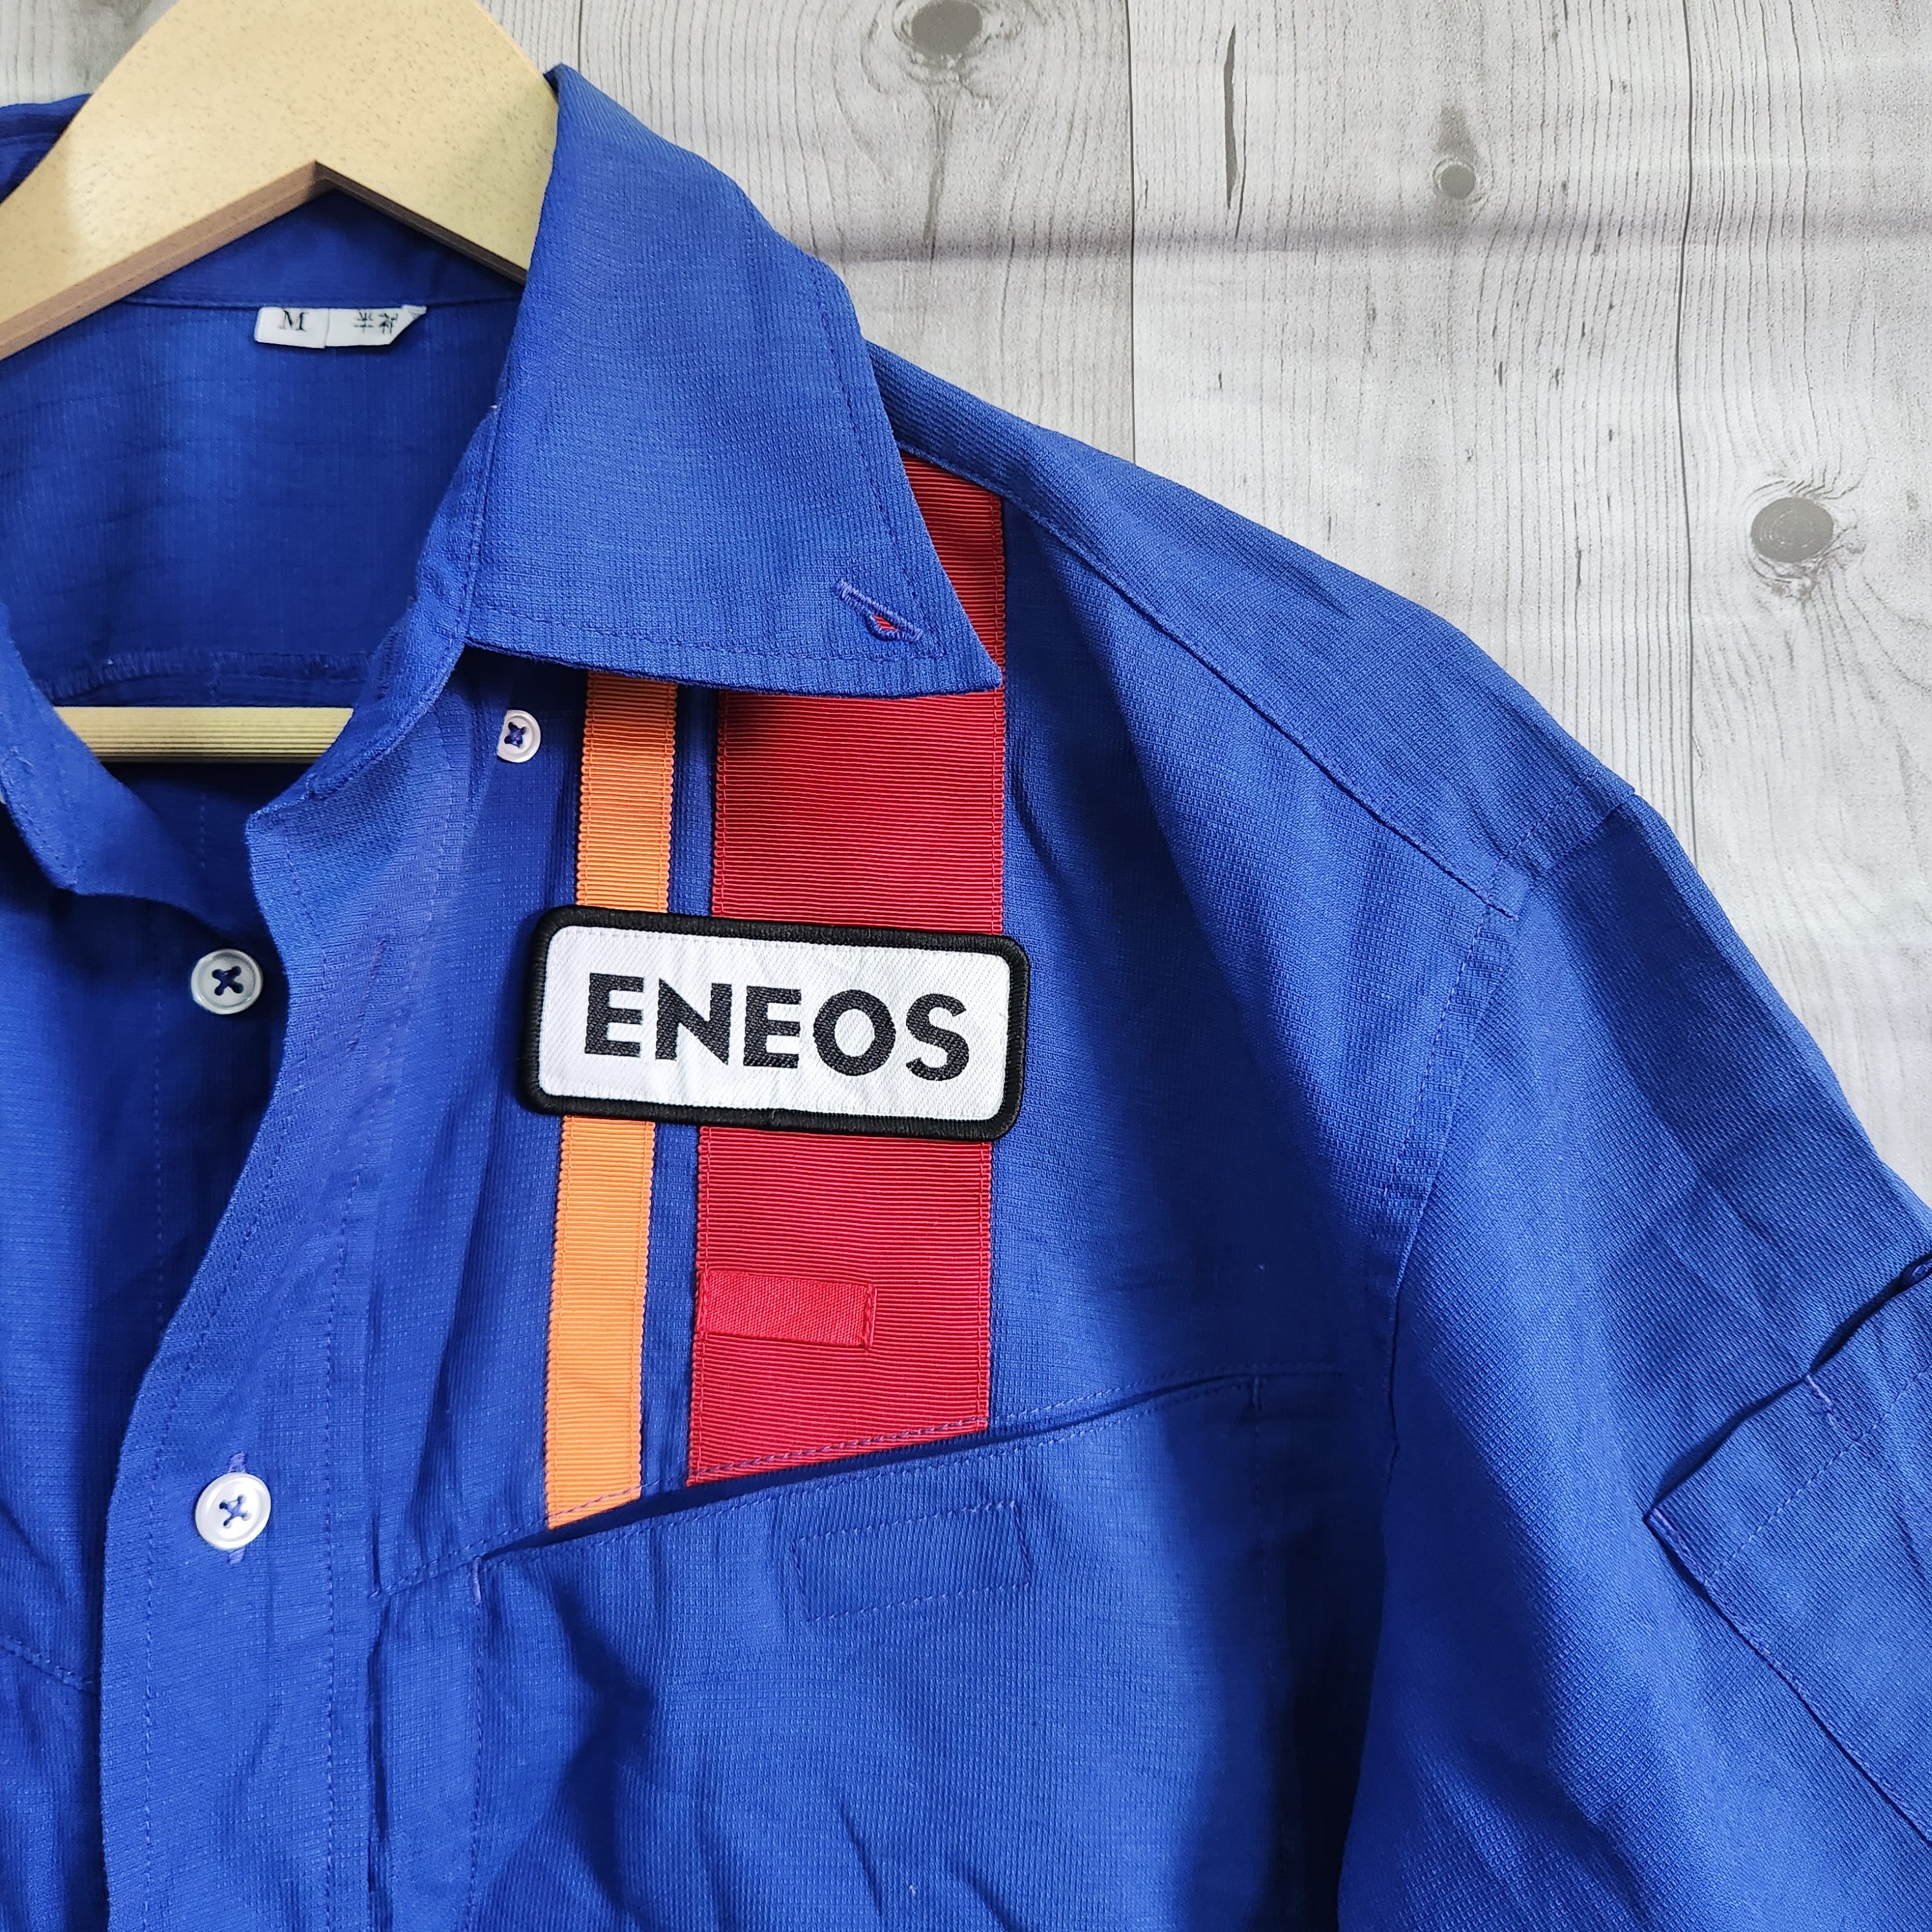 Vintage Japan ENEOS Workers Outlet Shirts - 3